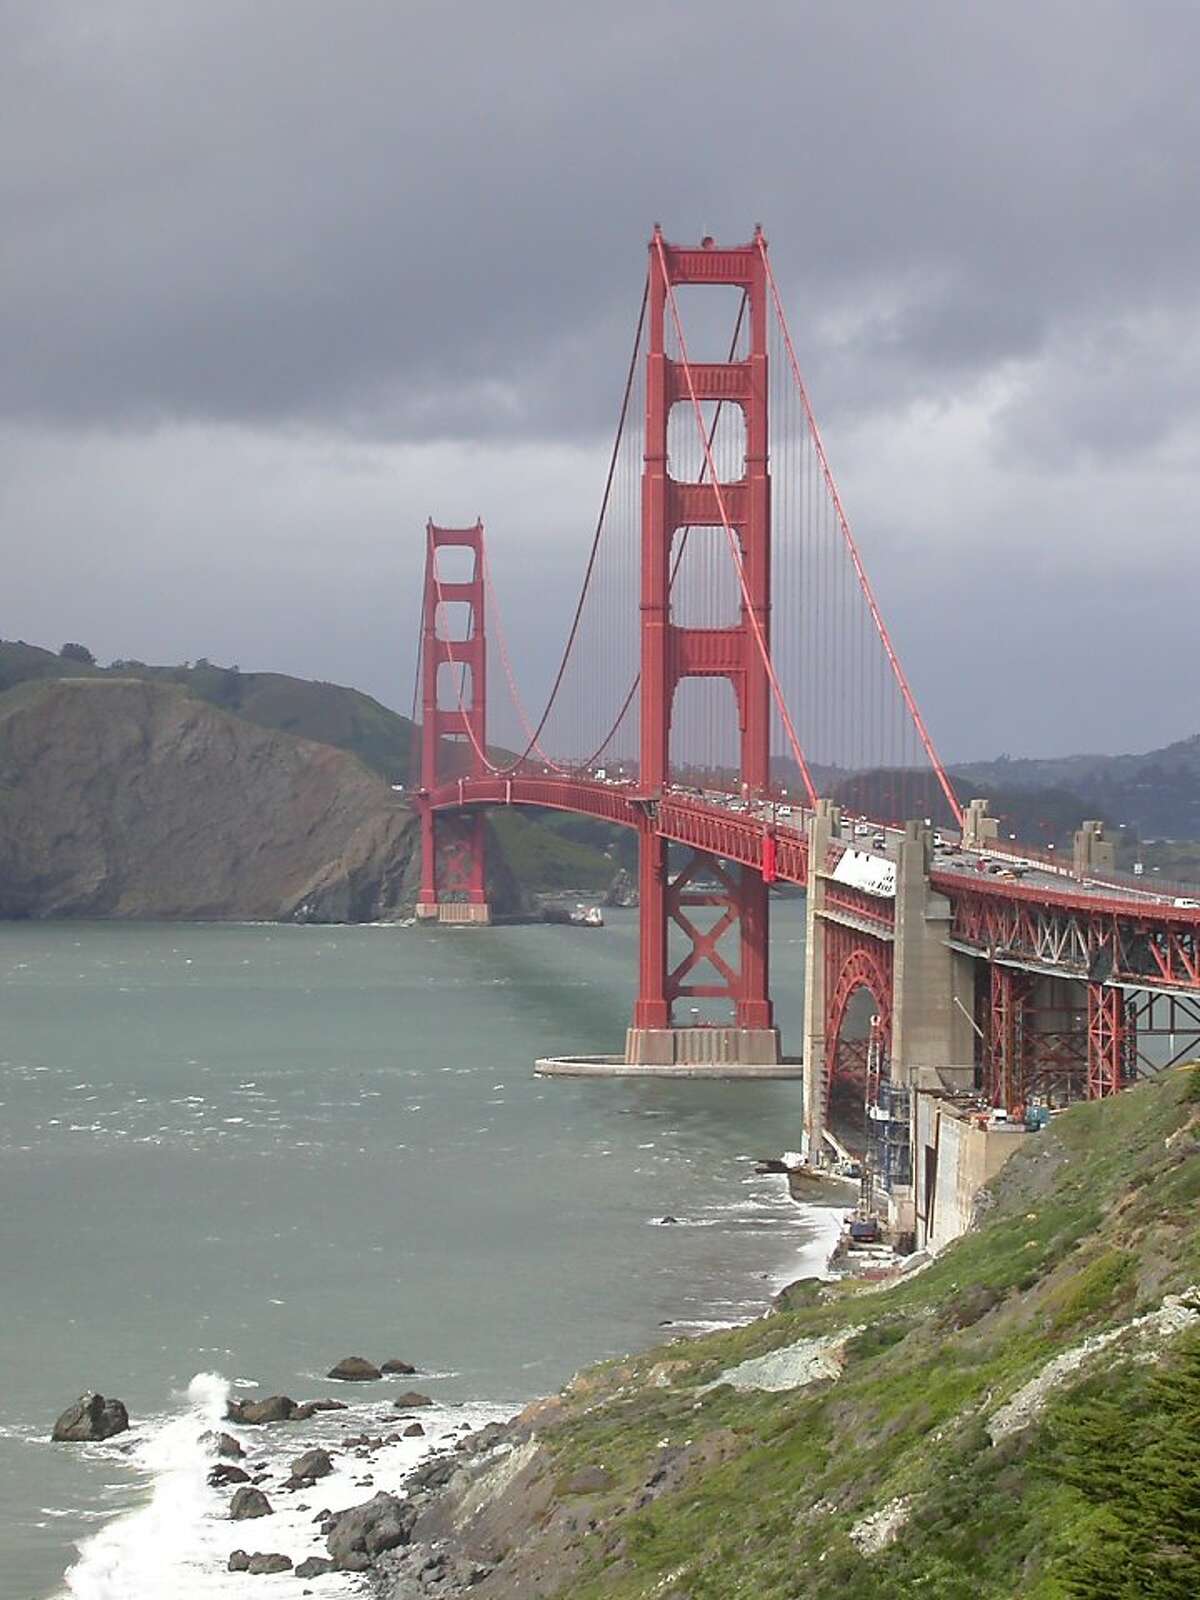 Golden Gate Bridge as seen from the Coast Trail, a short walk west from the toll plaza area. Photo: Tom Stienstra